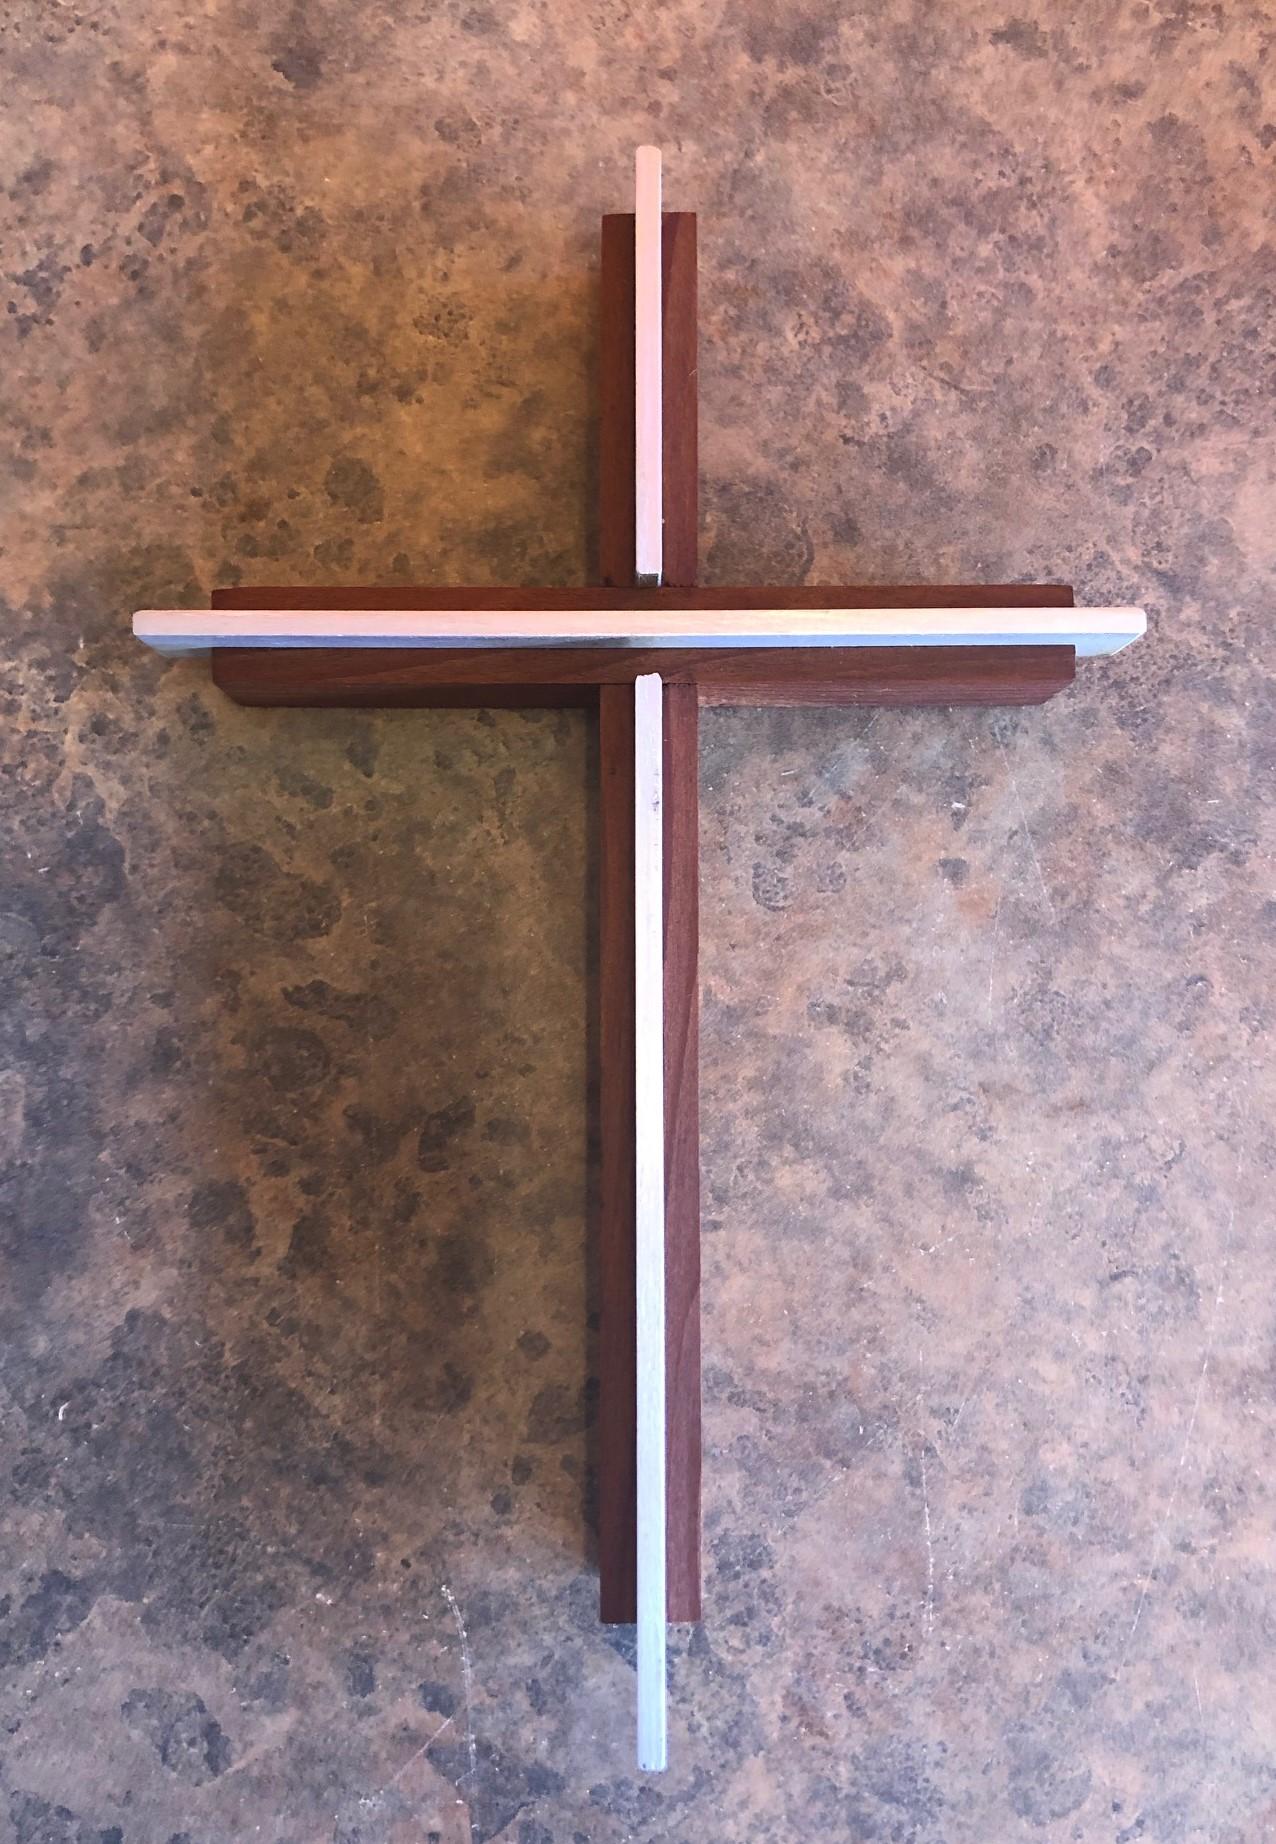 Minimalist wood and brushed aluminum crucifix / cross, circa, 1970s. The piece measures 7.75